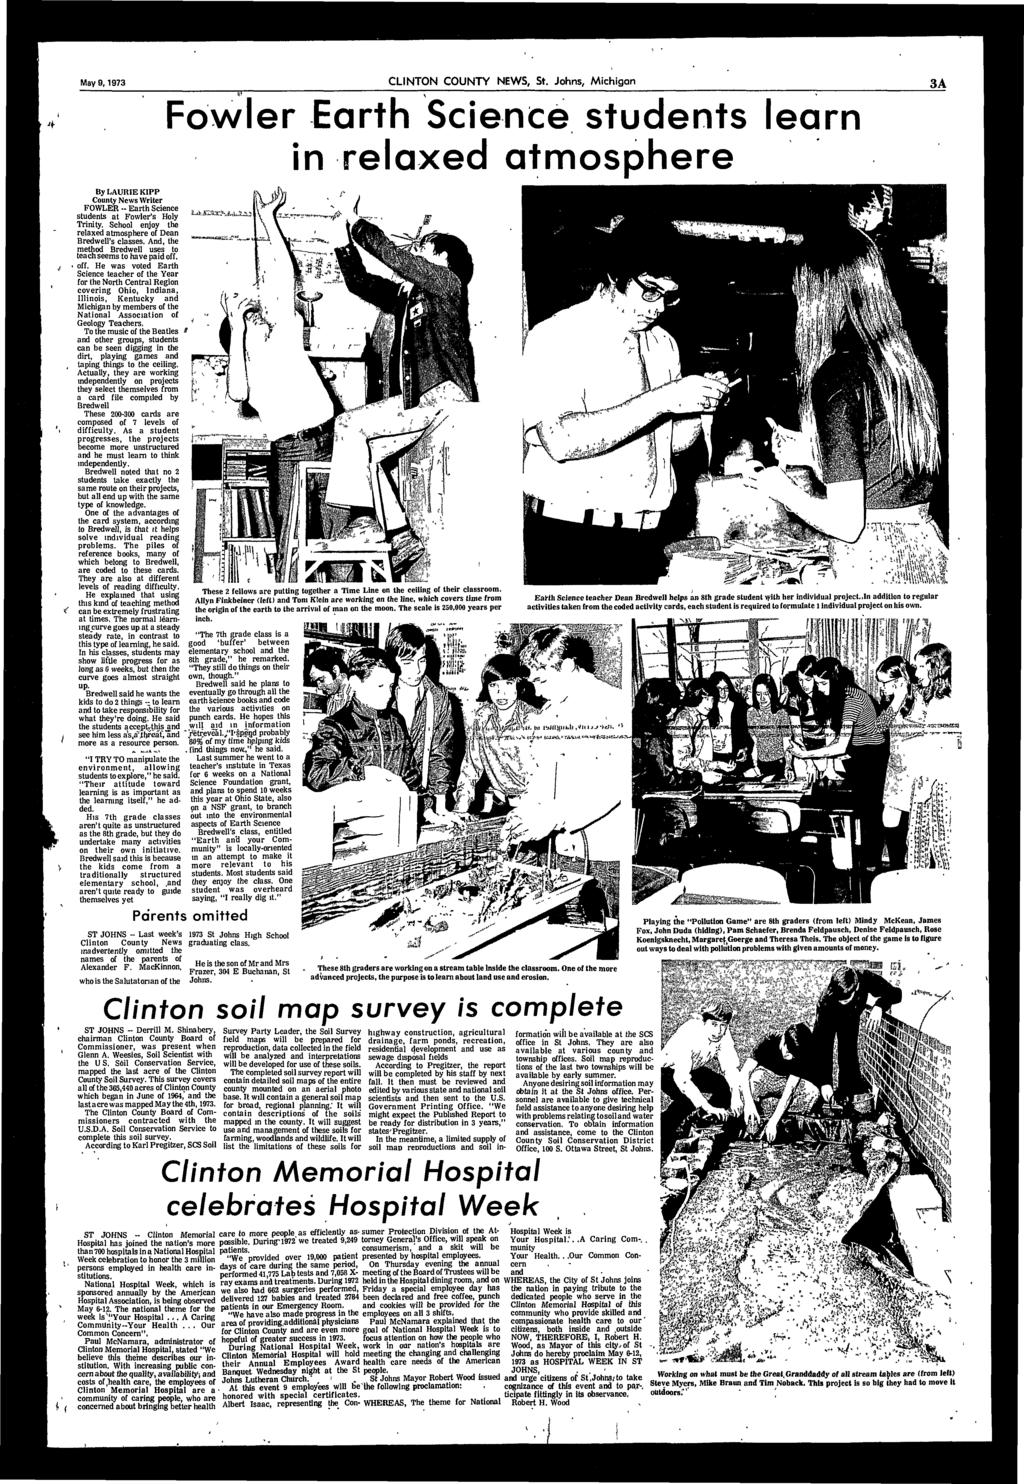 May 9,1973 CLNTON COUNTY NEWS, St. Johns, Mchgan 3A Fowler Earth Scence students learn n relaxed atmosphere By LAURE KPP County News Wrter FOWLER -- Earth Scence students at Fowlers Holy Trnty.